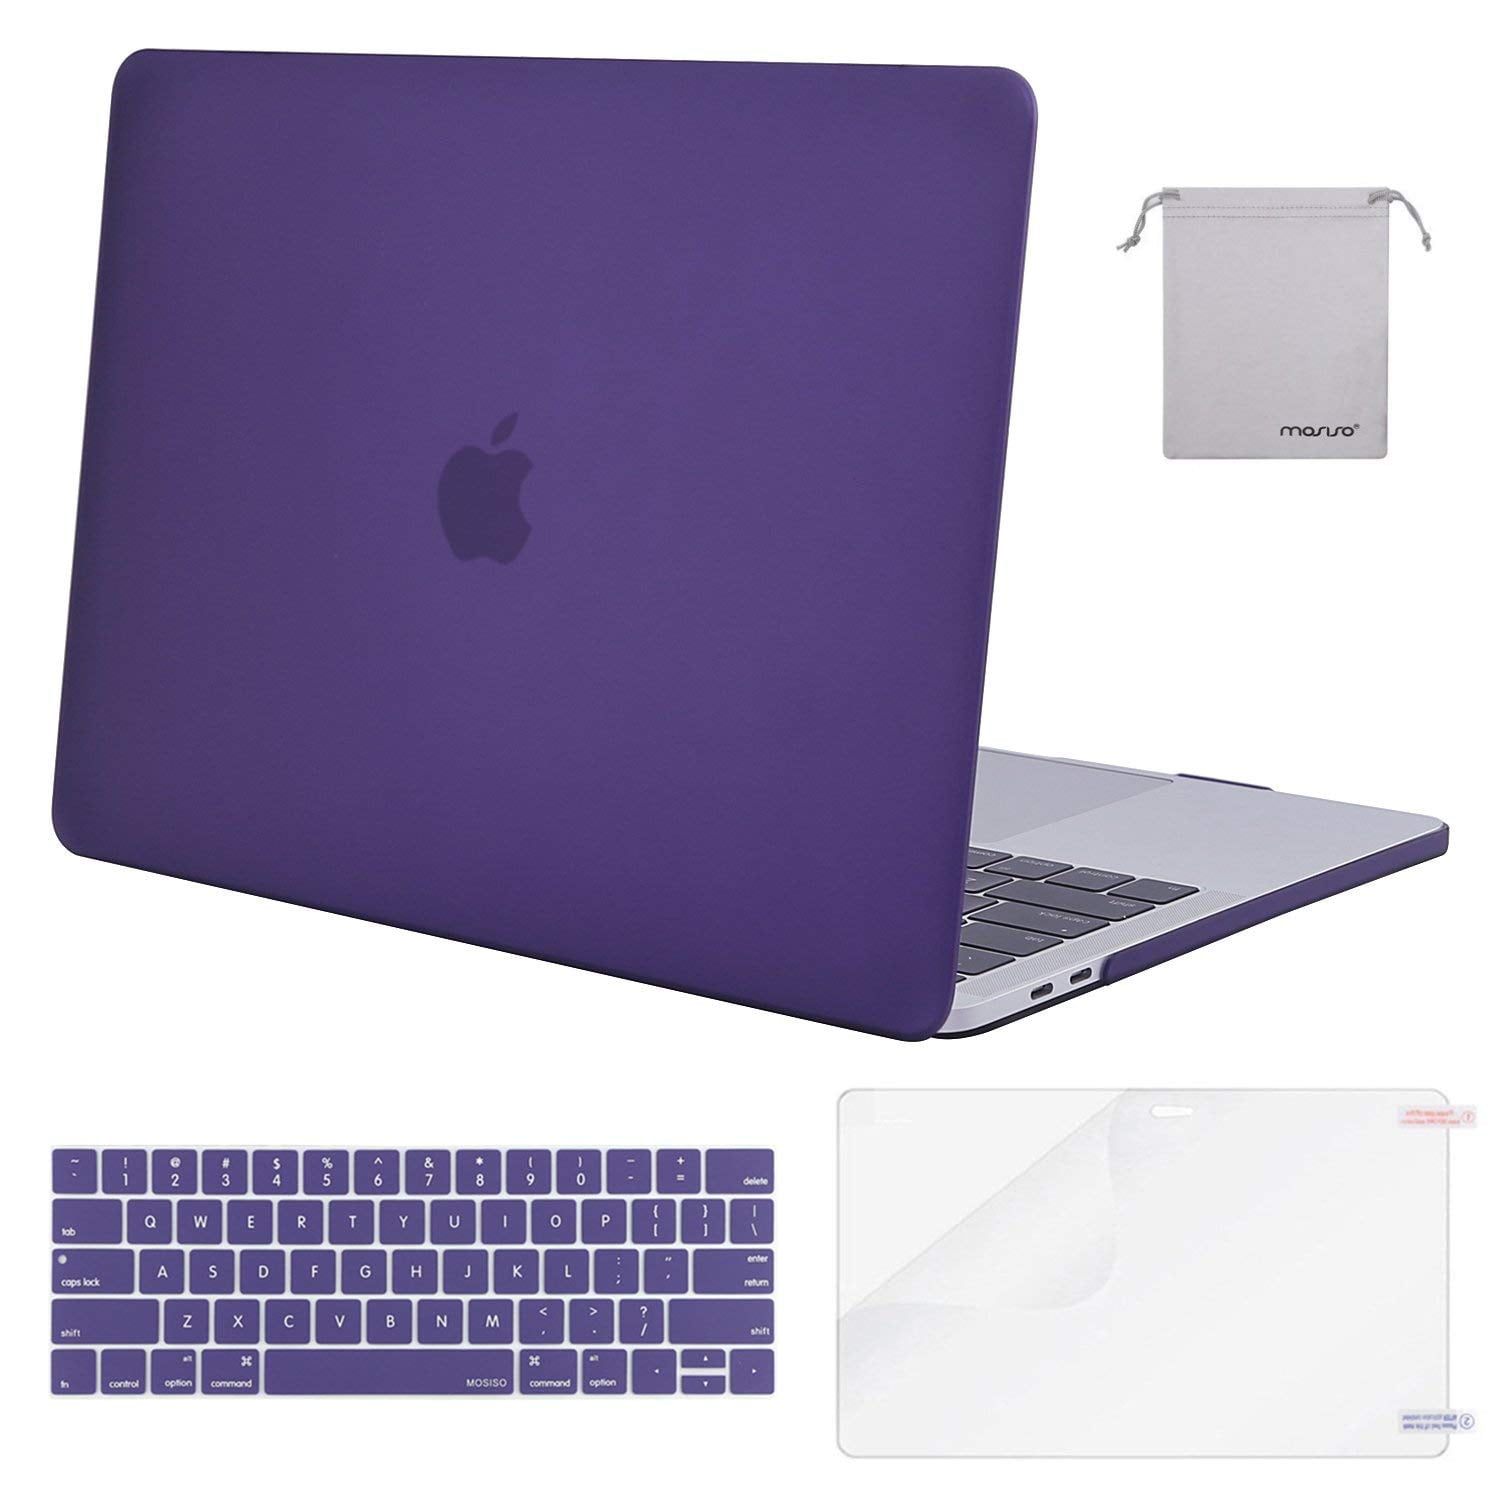 4 in 1 Cute Look Case Soft Sleeve Bag Keyboard Cover For Macbook Pro Retina 13" 